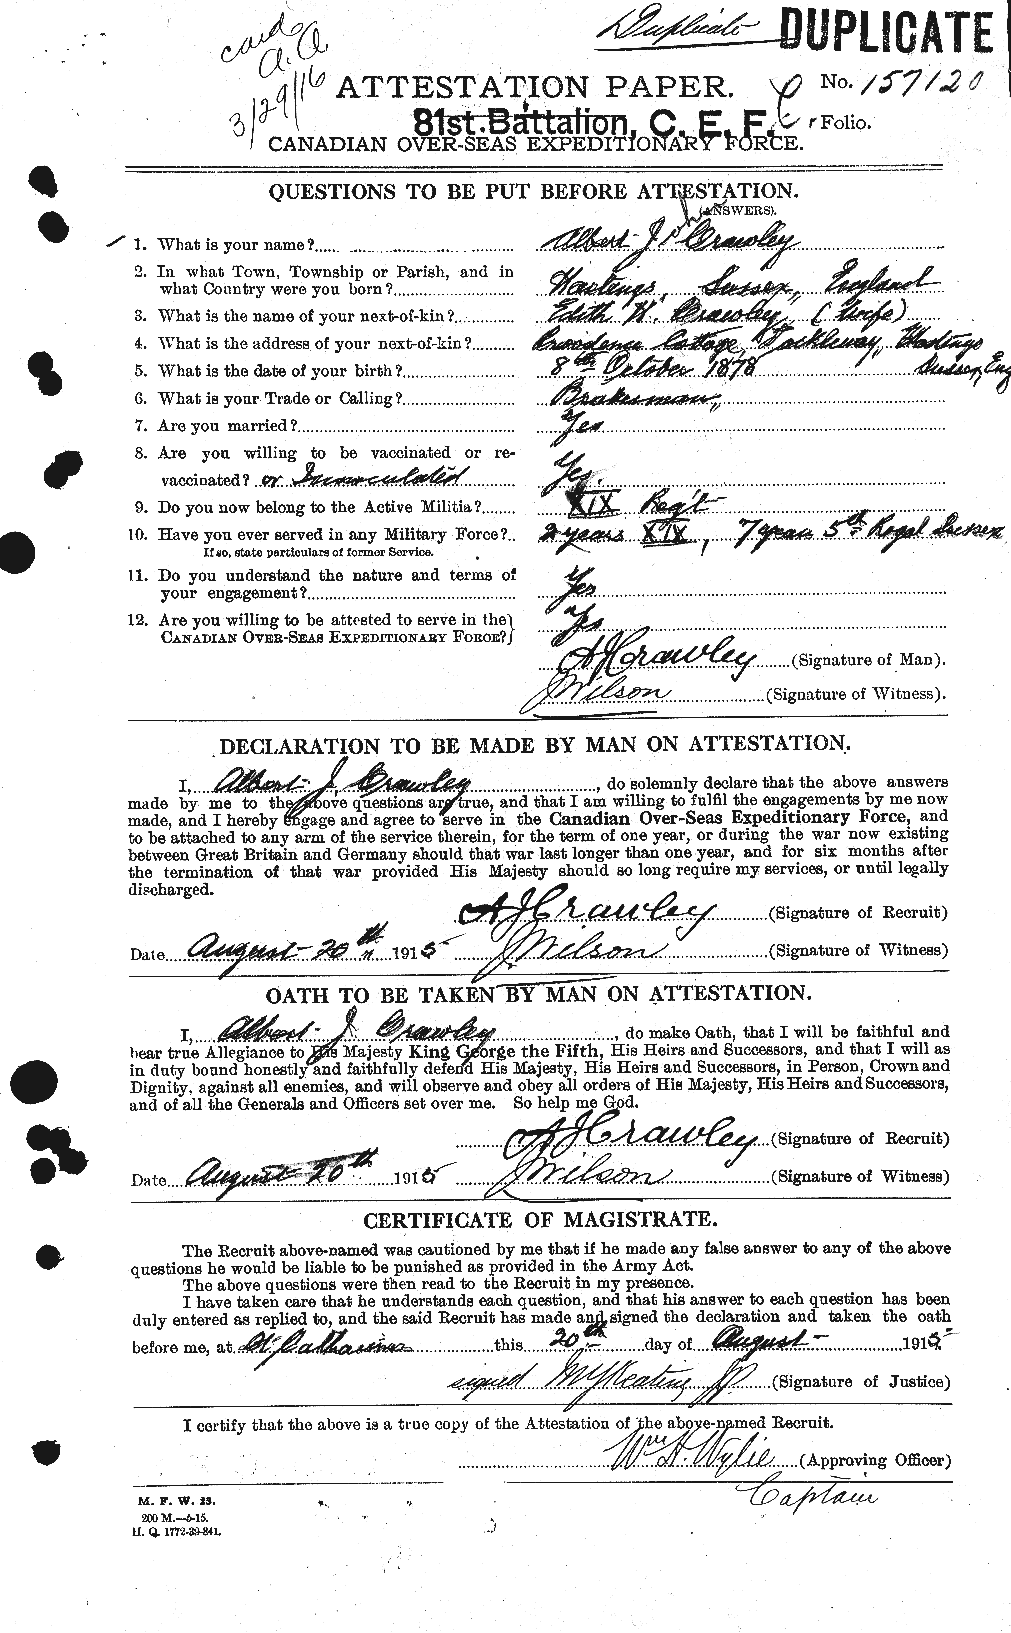 Personnel Records of the First World War - CEF 060679a